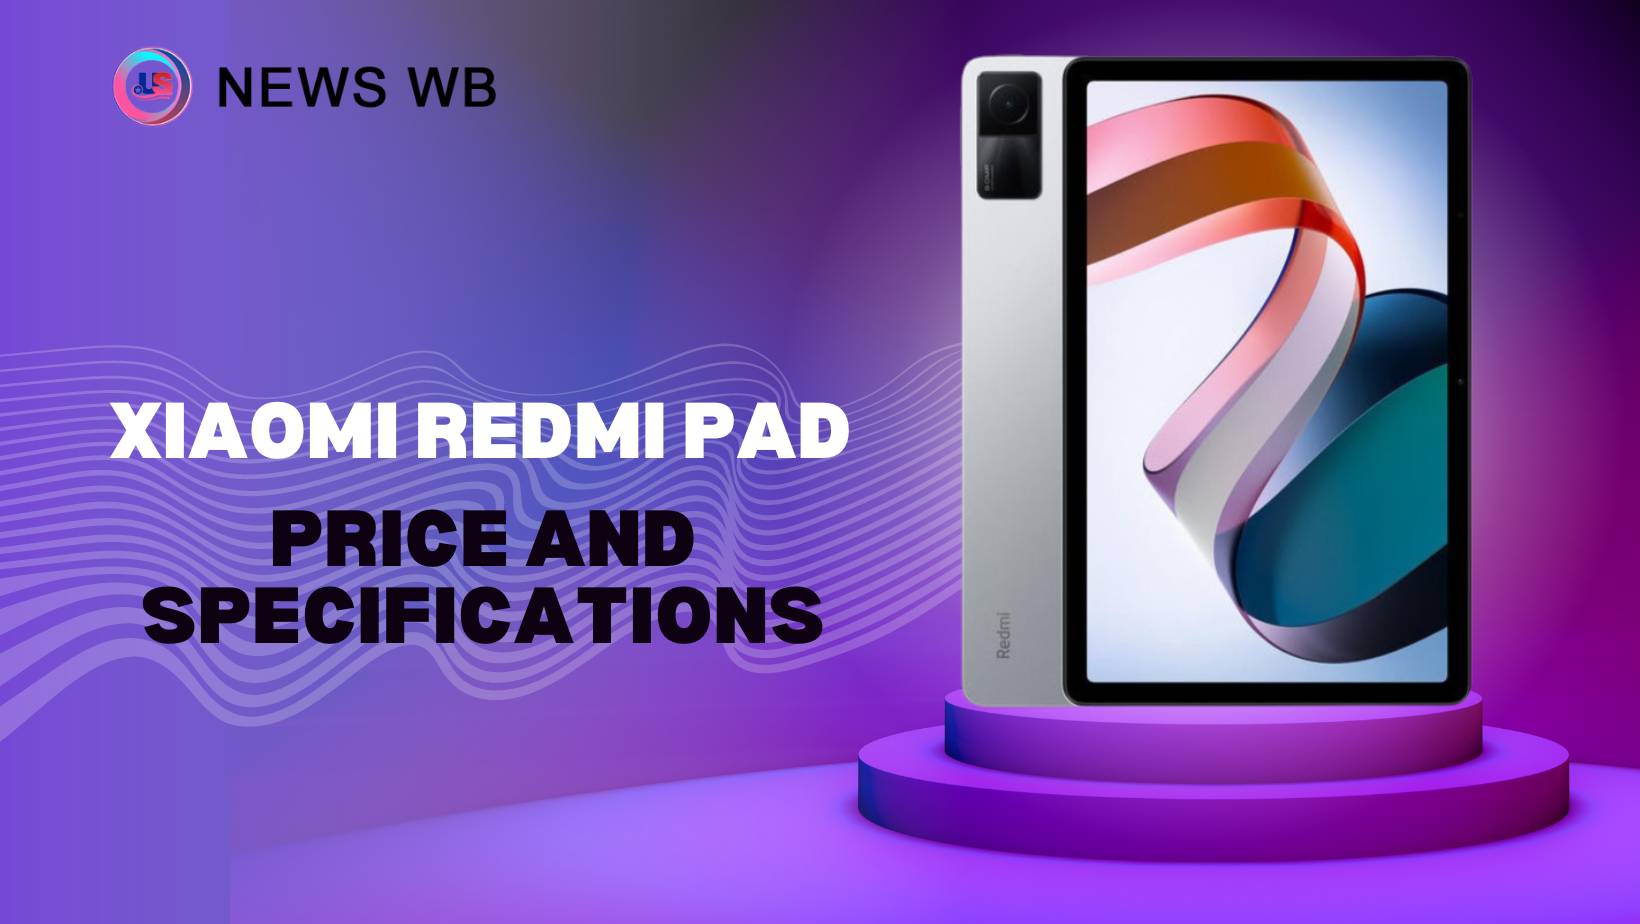 Xiaomi Redmi Pad Price and Specifications